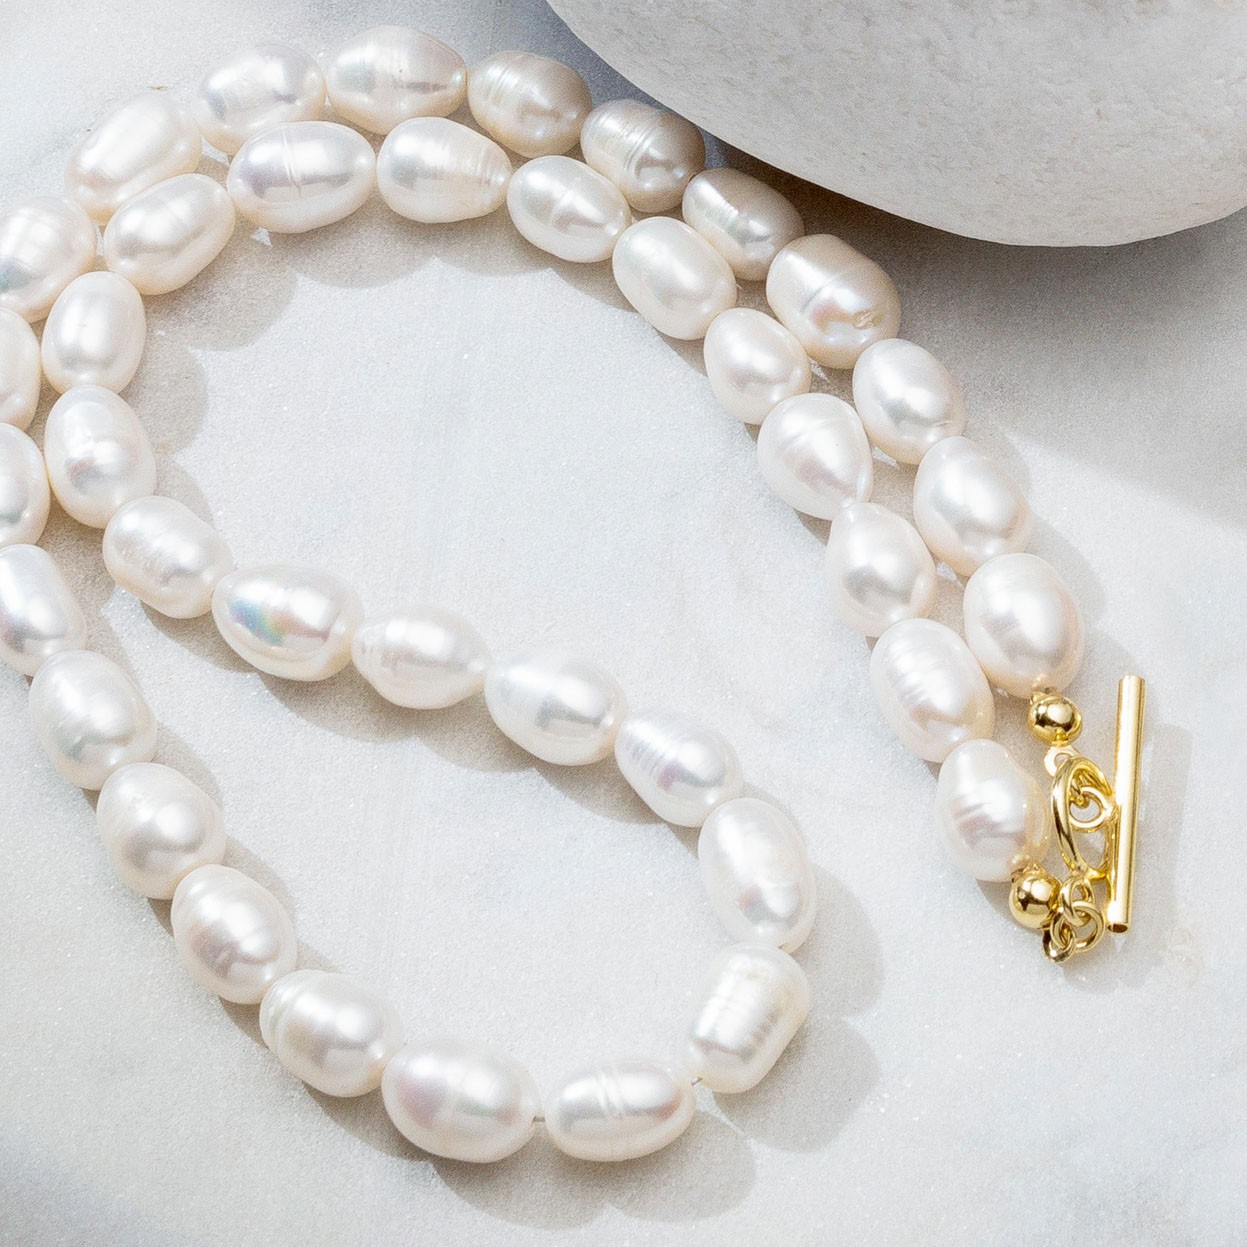 Flexible white freshwater pearls, sterling silver 925